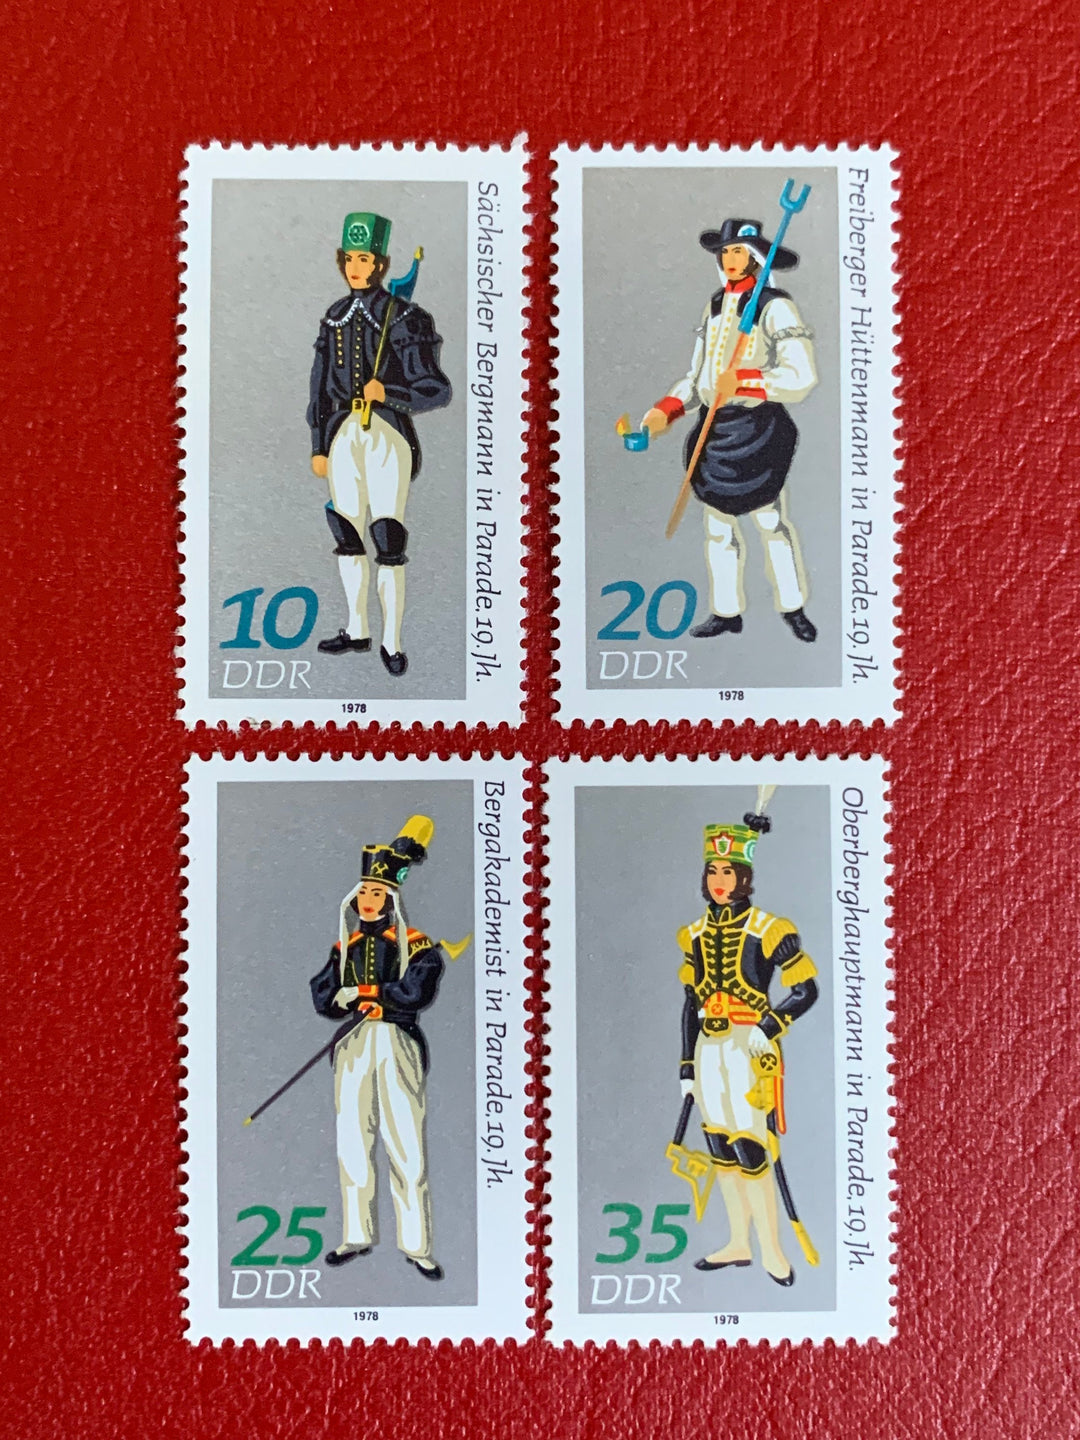 Germany (DDR) - Original Vintage Postage Stamps- 1978 Parade Costume of Mining and Metalurgists